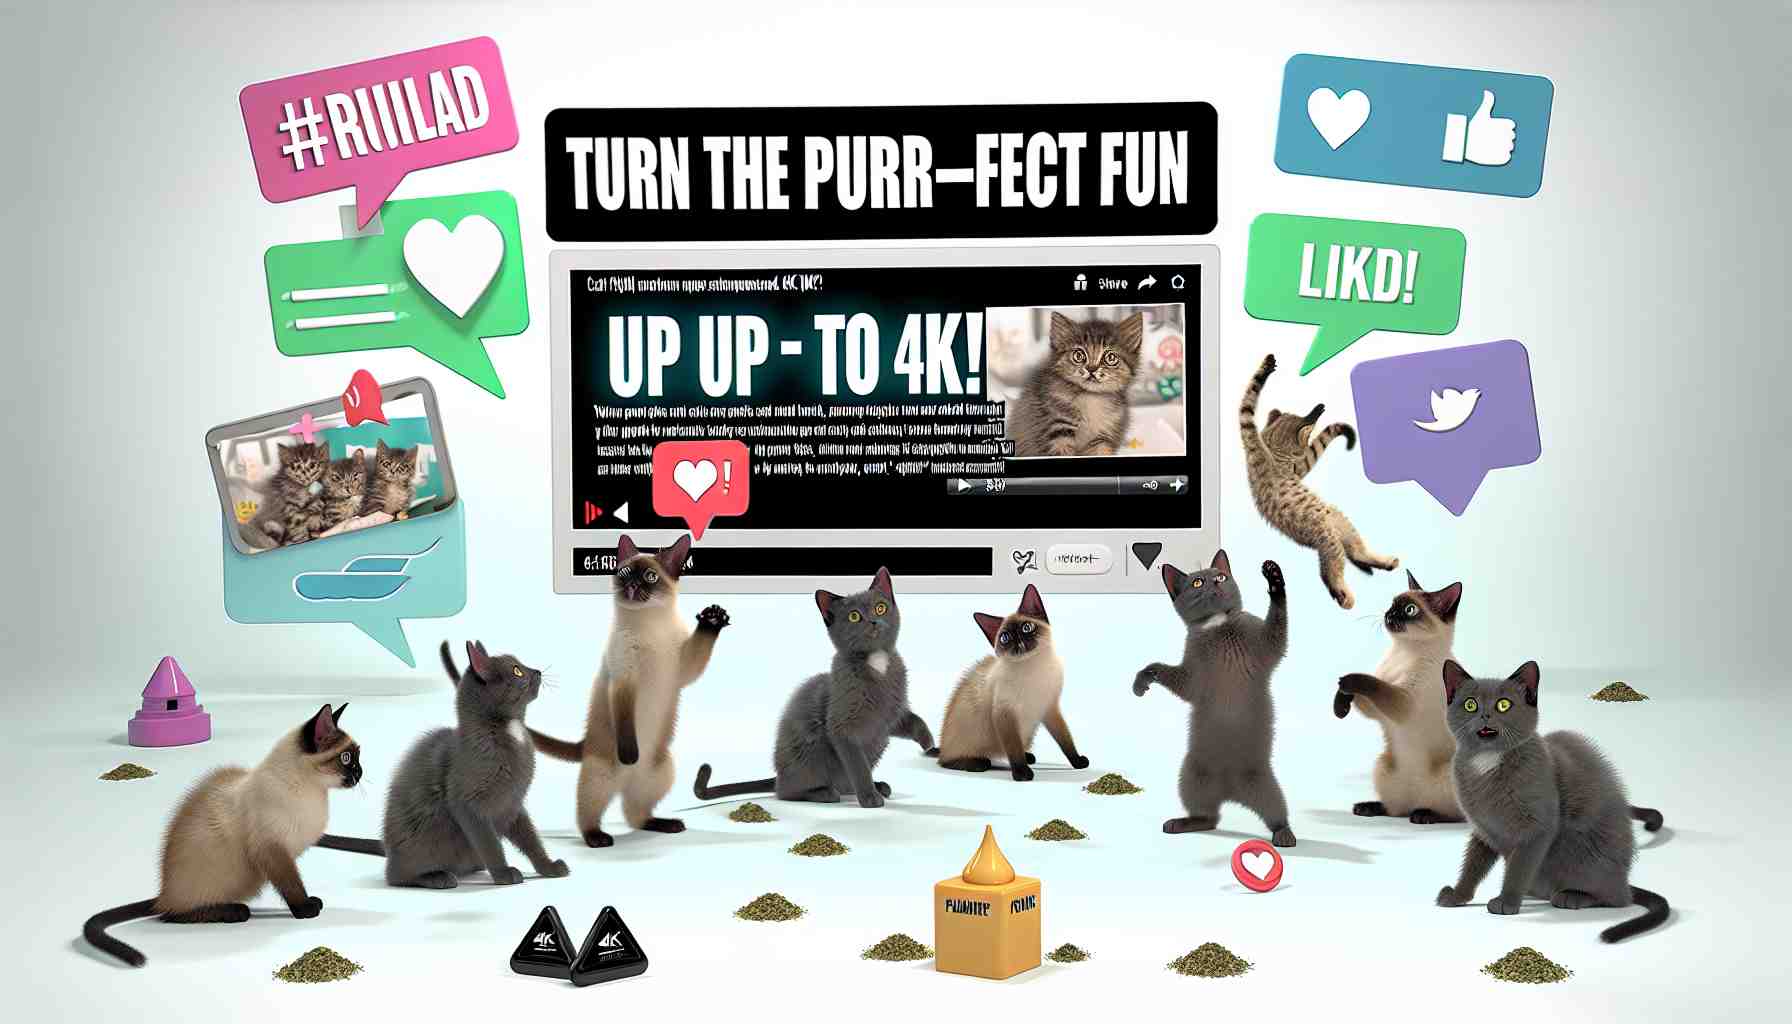 Revamp your home to feline-fabulous! Find out how with our purrfect list of top 'cat videos'. See hilarious antics, athletic feats and more. Unleash the cats today!